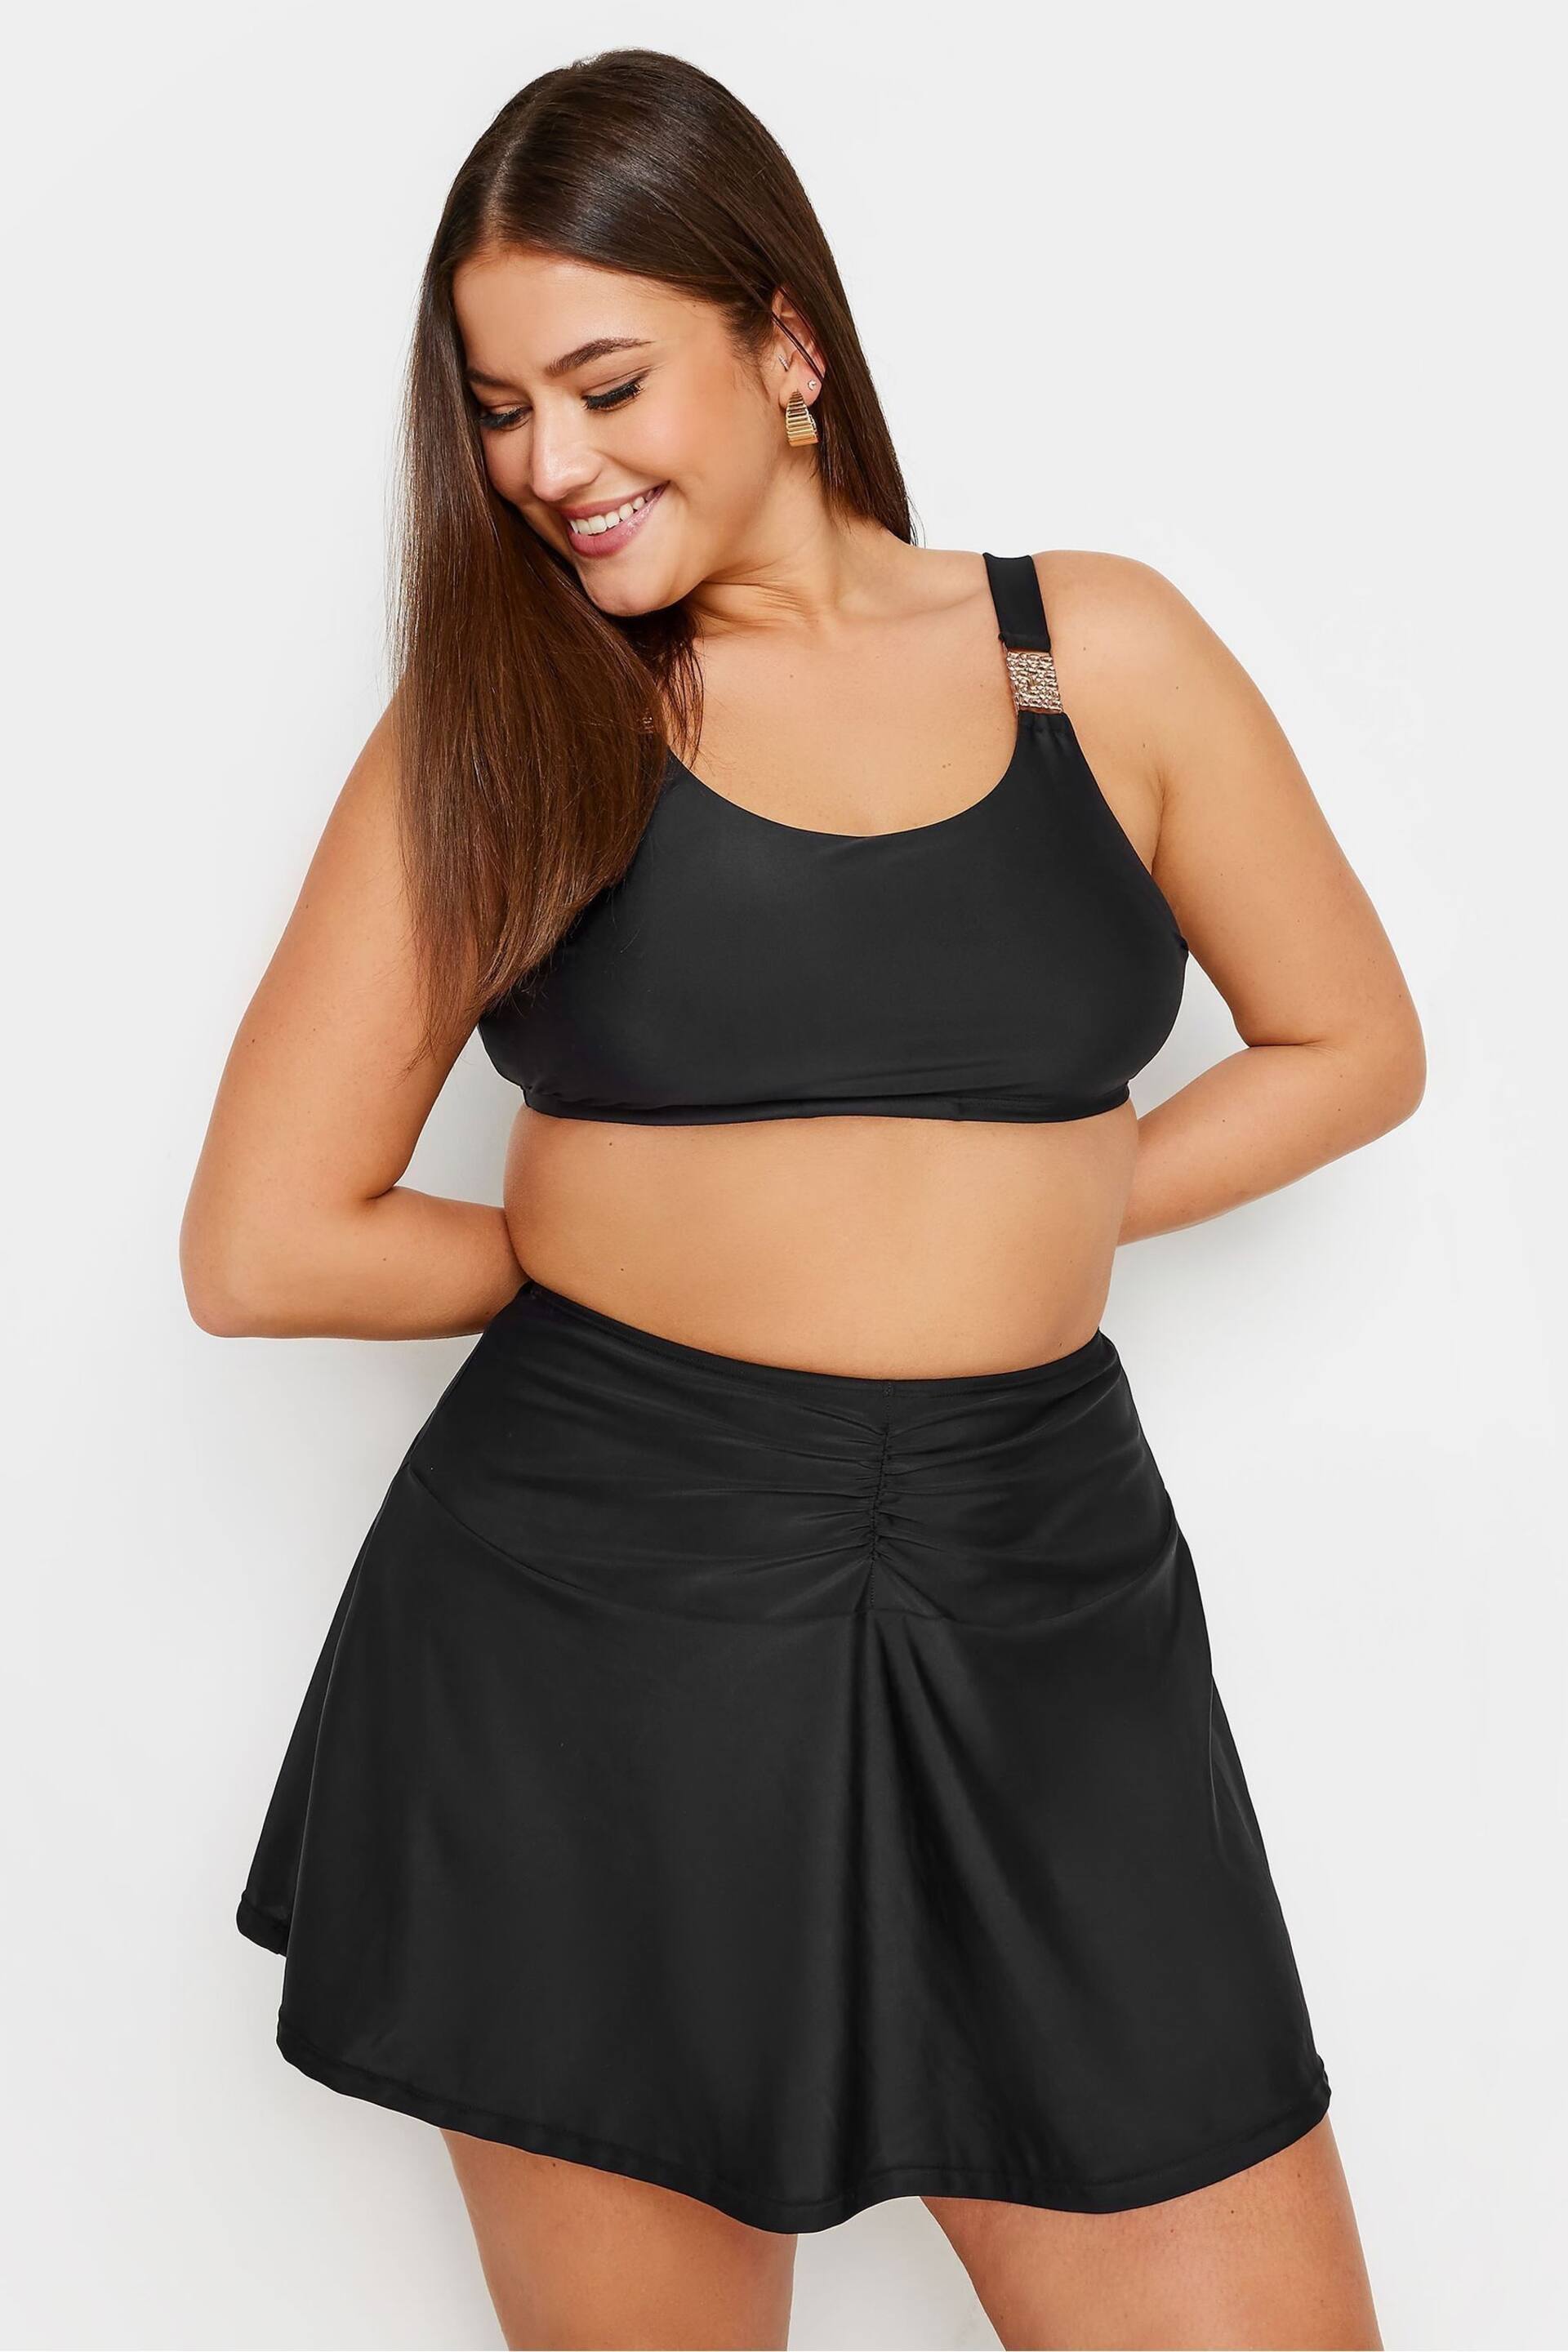 Yours Curve Black Ruched Front Swim Skirt - Image 1 of 5